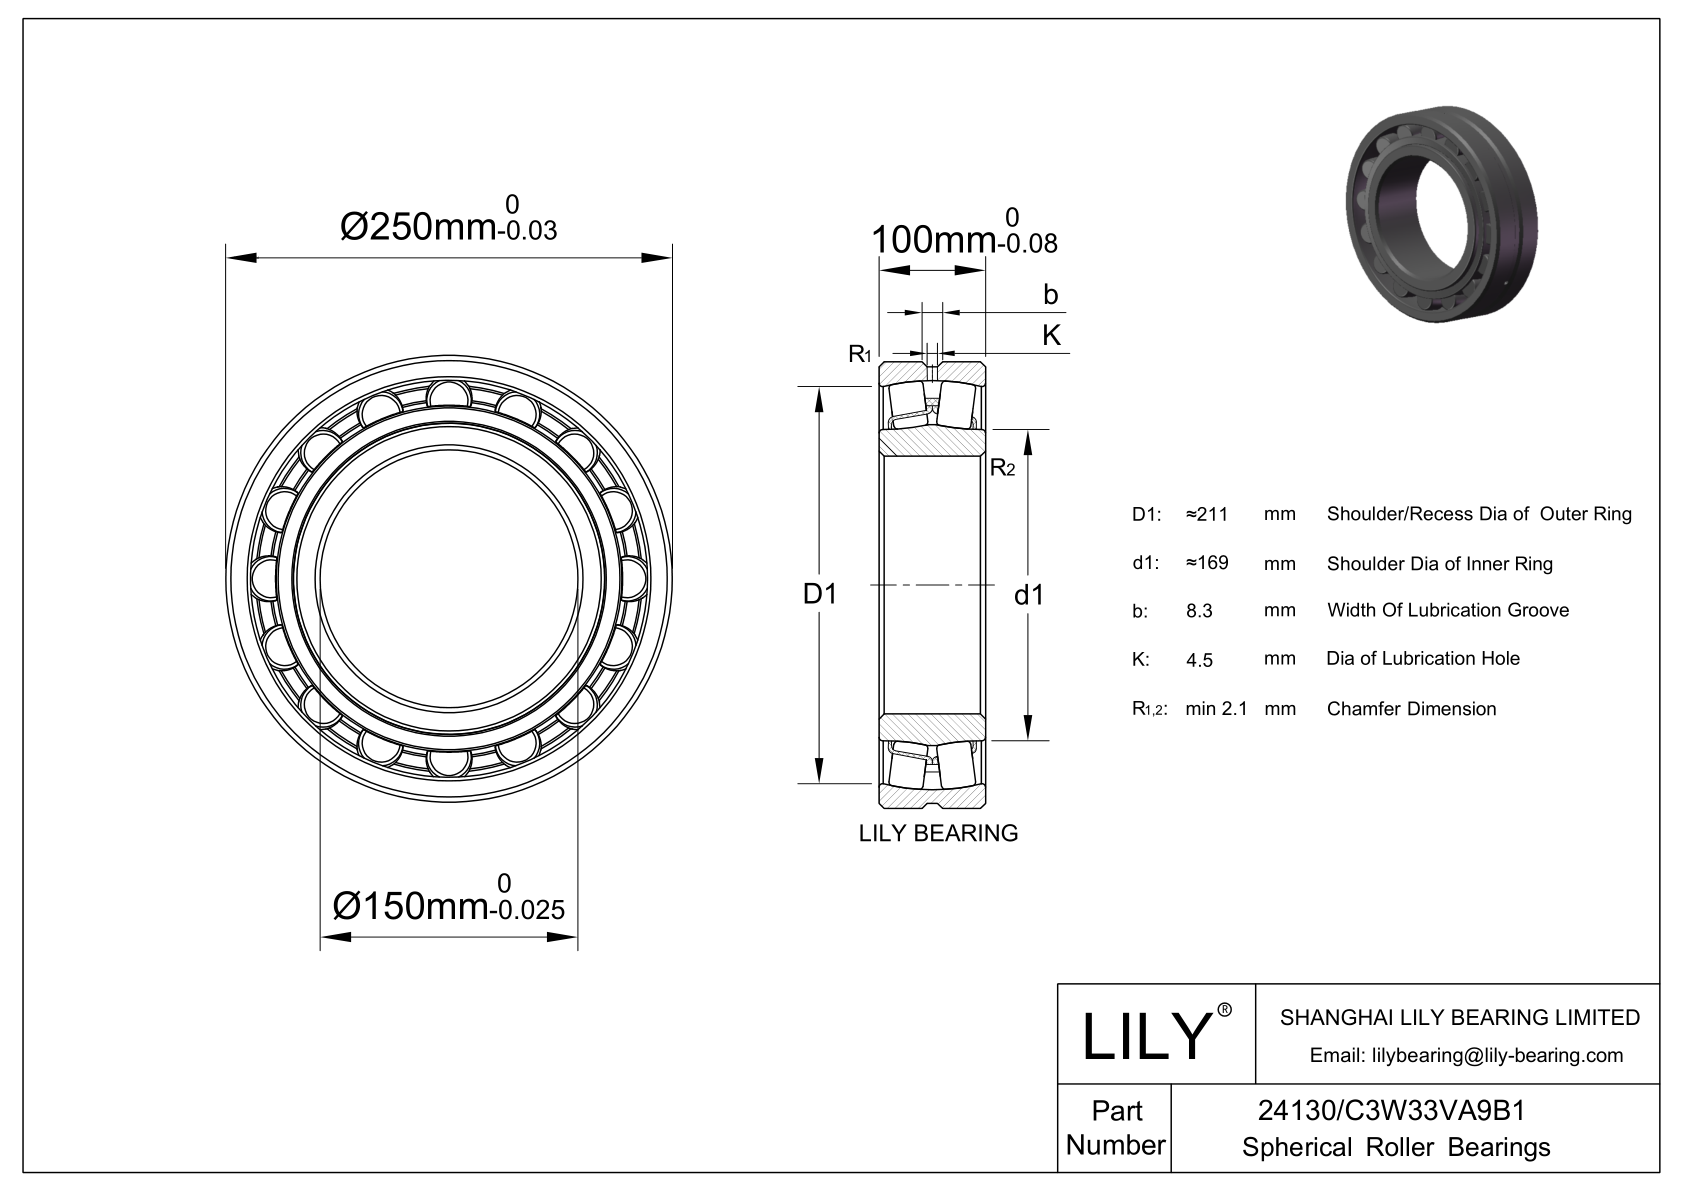 24130/C3W33VA9B1 Double Row Spherical Roller Bearing cad drawing